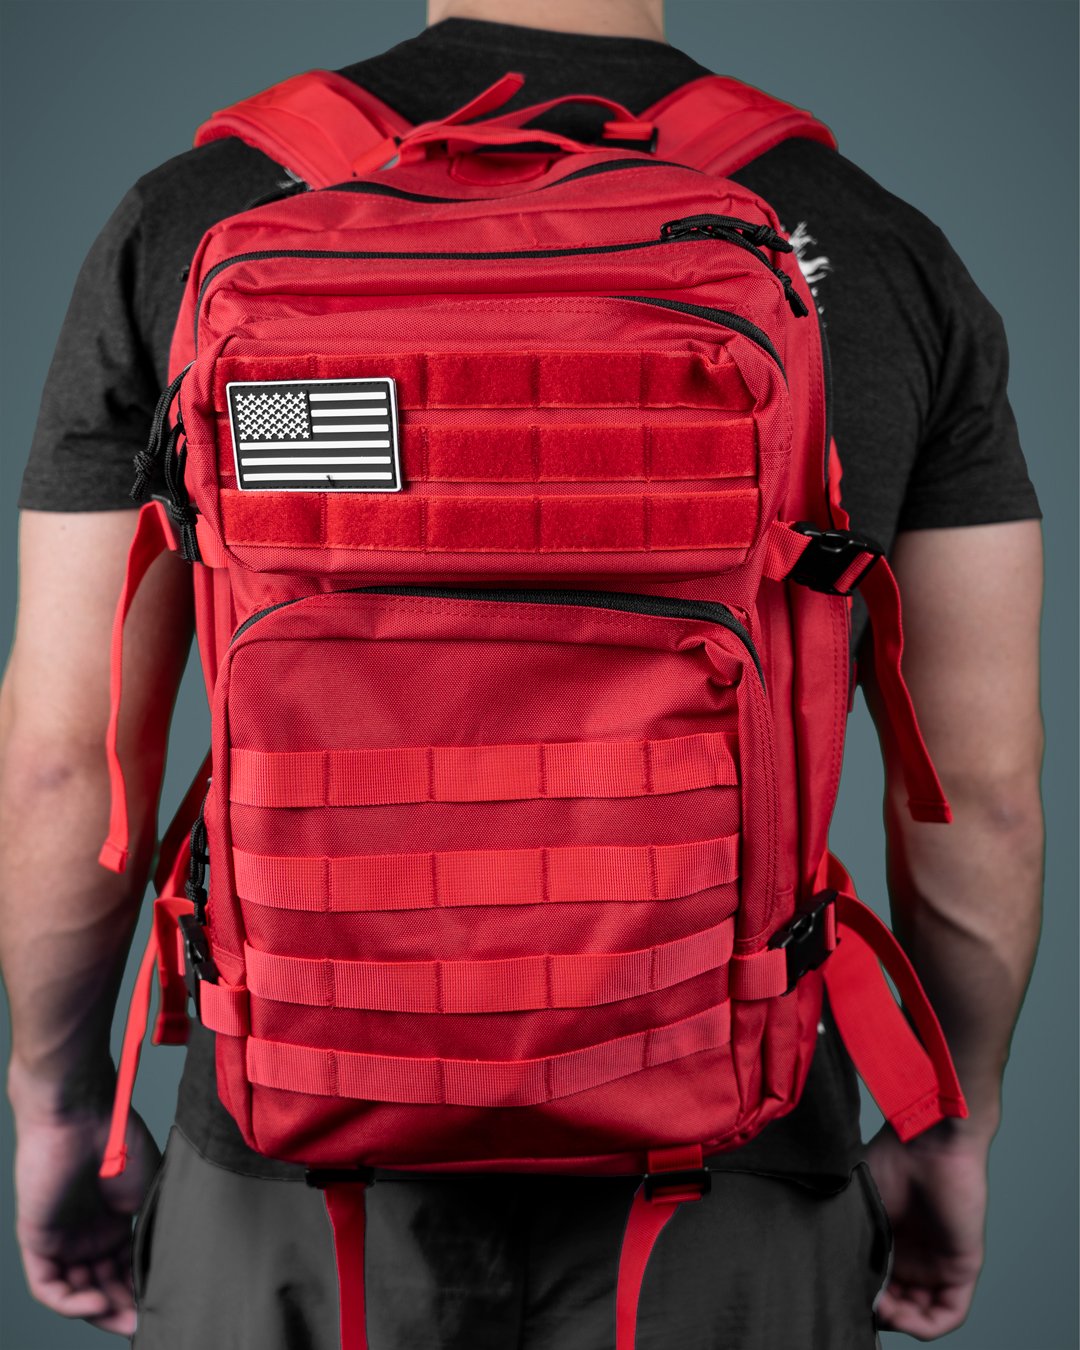 VF Tactical Backpack